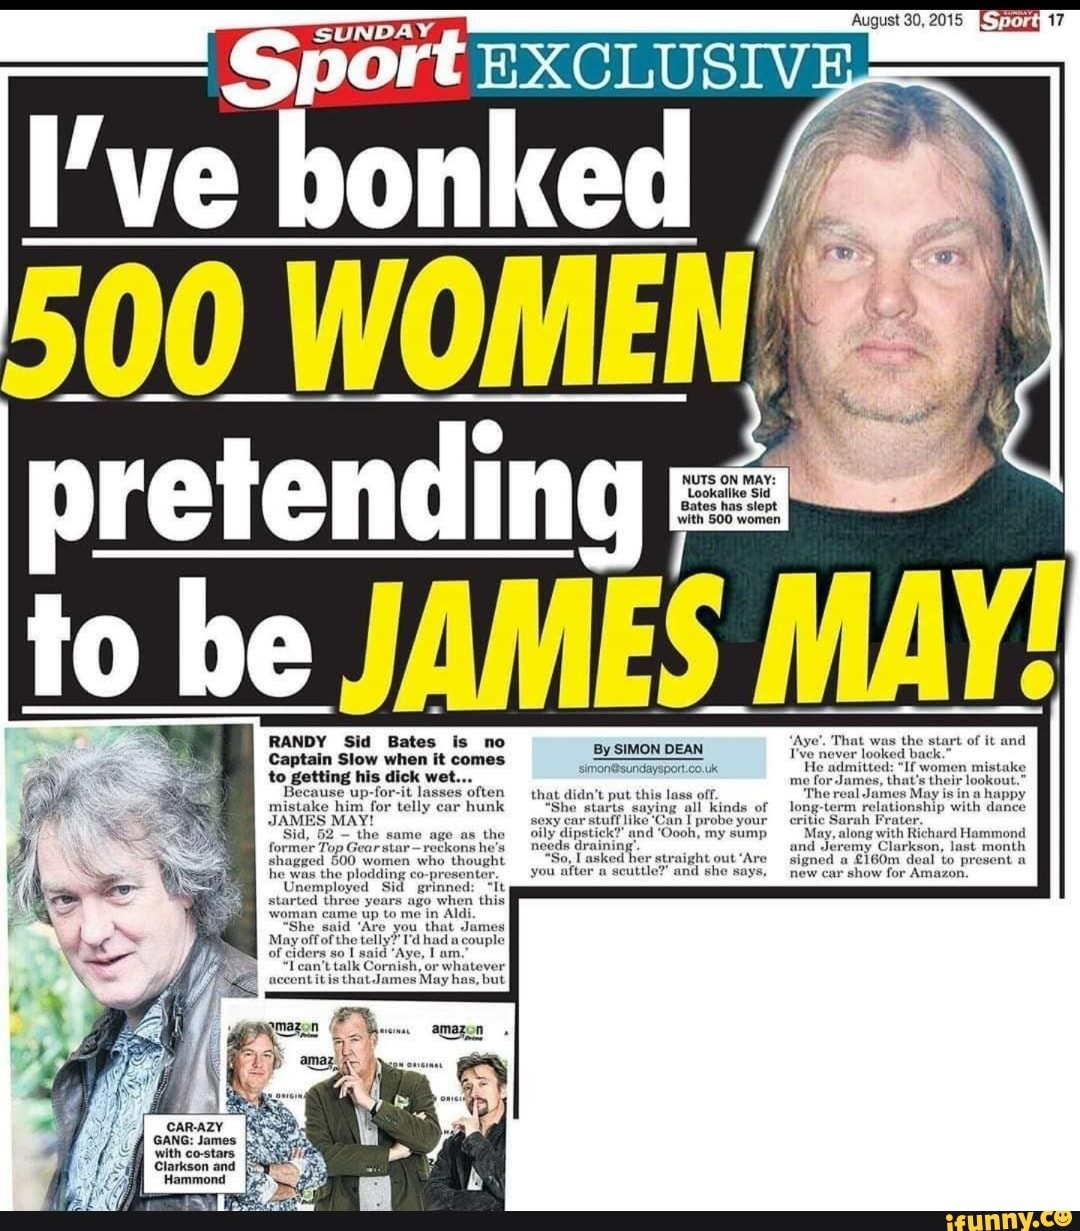 With 500 women to be JAMES MAY! RANDY Sid Bates is no Phat was tho ...